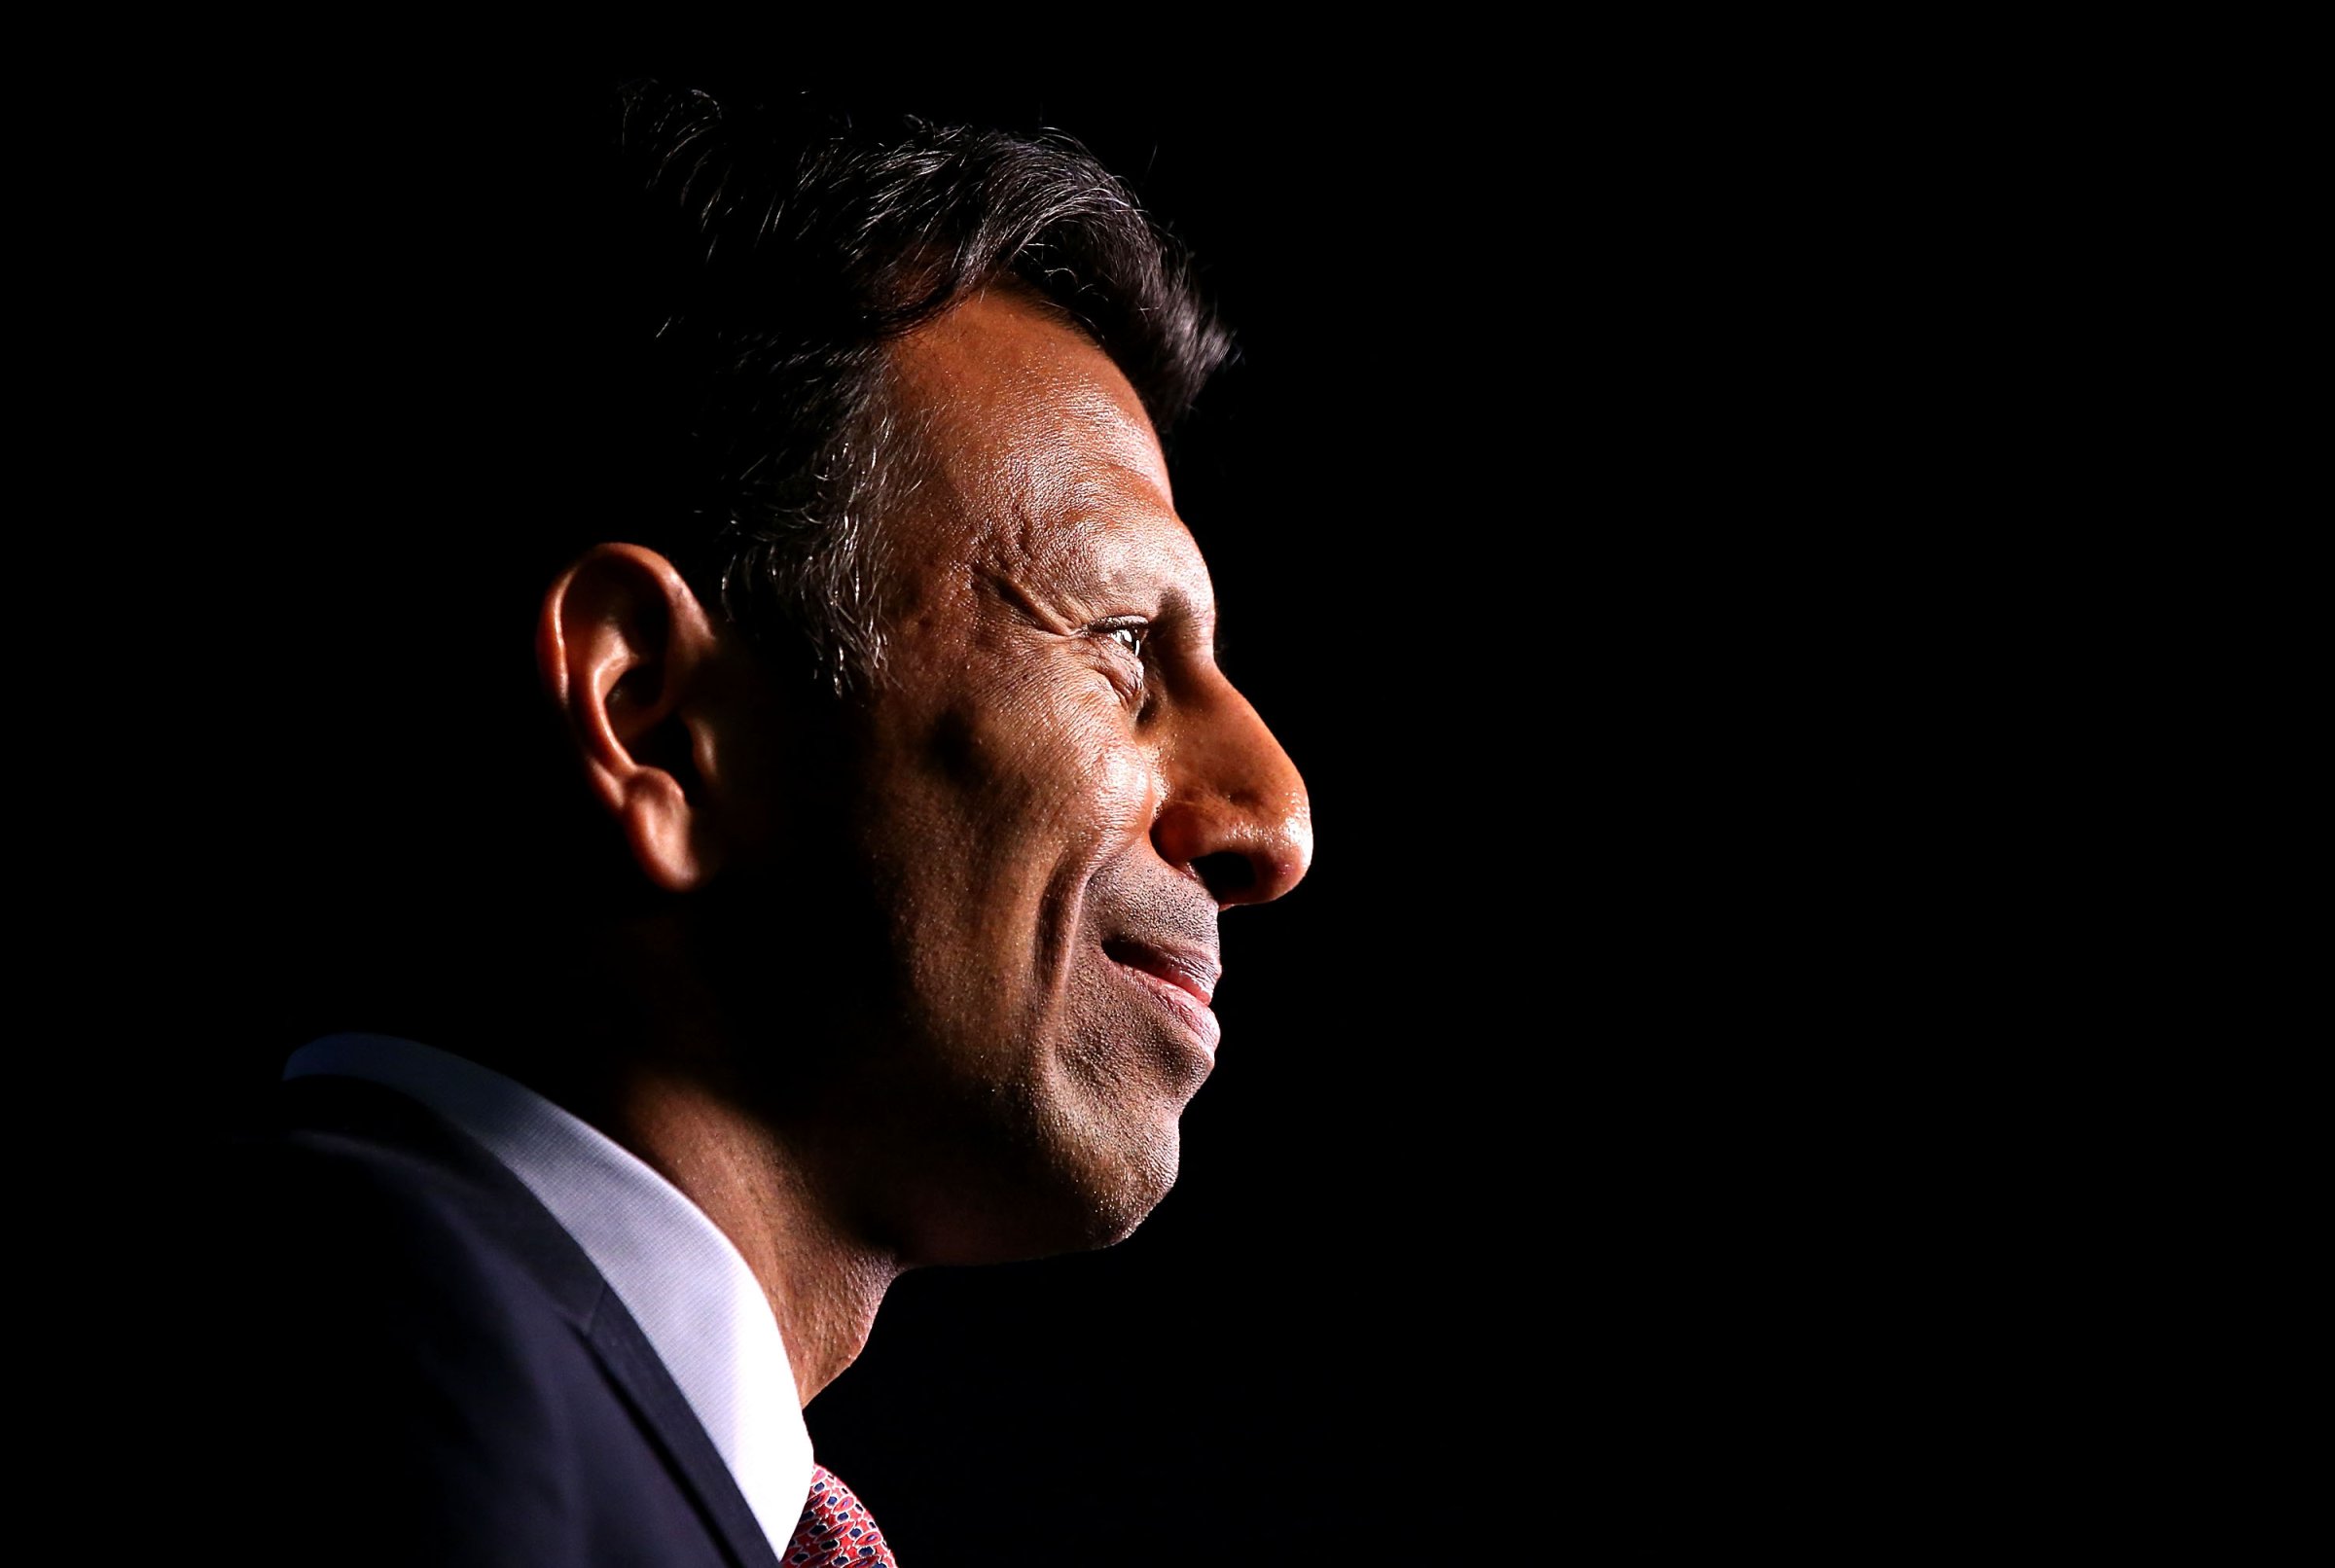 Louisiana Governor Bobby Jindal announces his candidacy for the 2016 Presidential nomination during a rally on June 24, 2015 in Kenner, Louisiana.